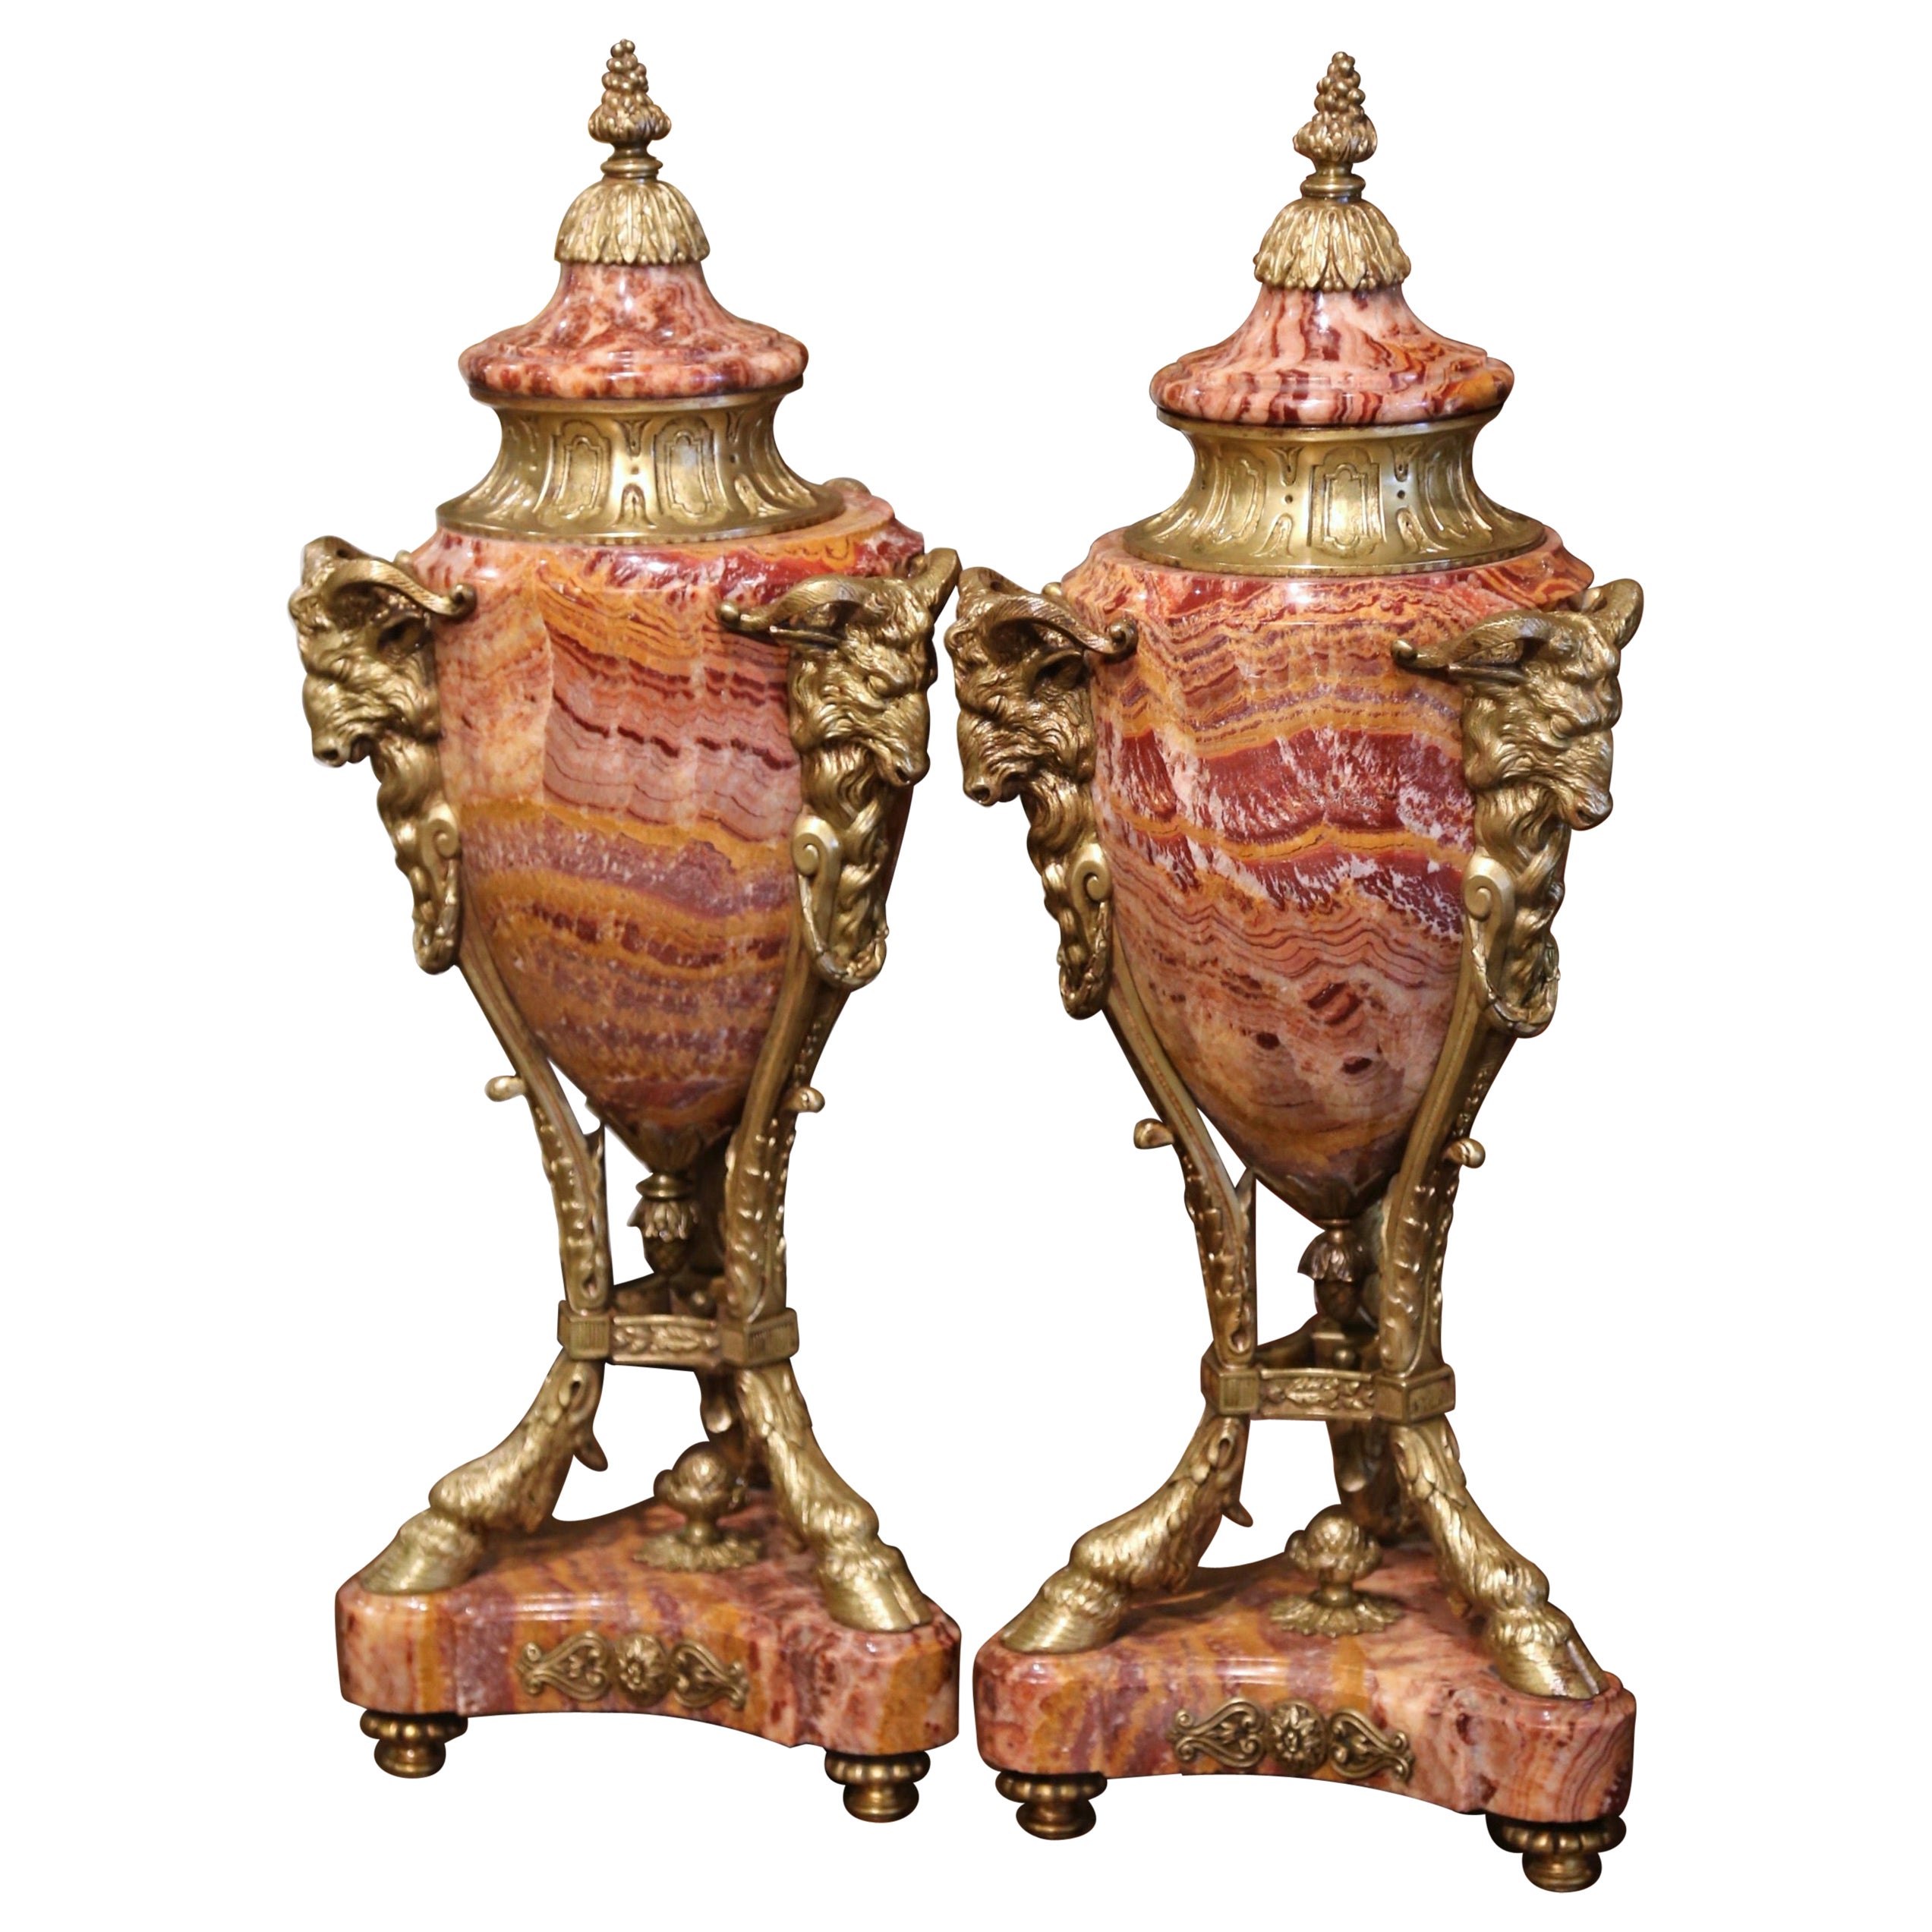 Pair of 19th Century Belgium Gilt Bronze-Mounted Variegated Onyx Covered Urns